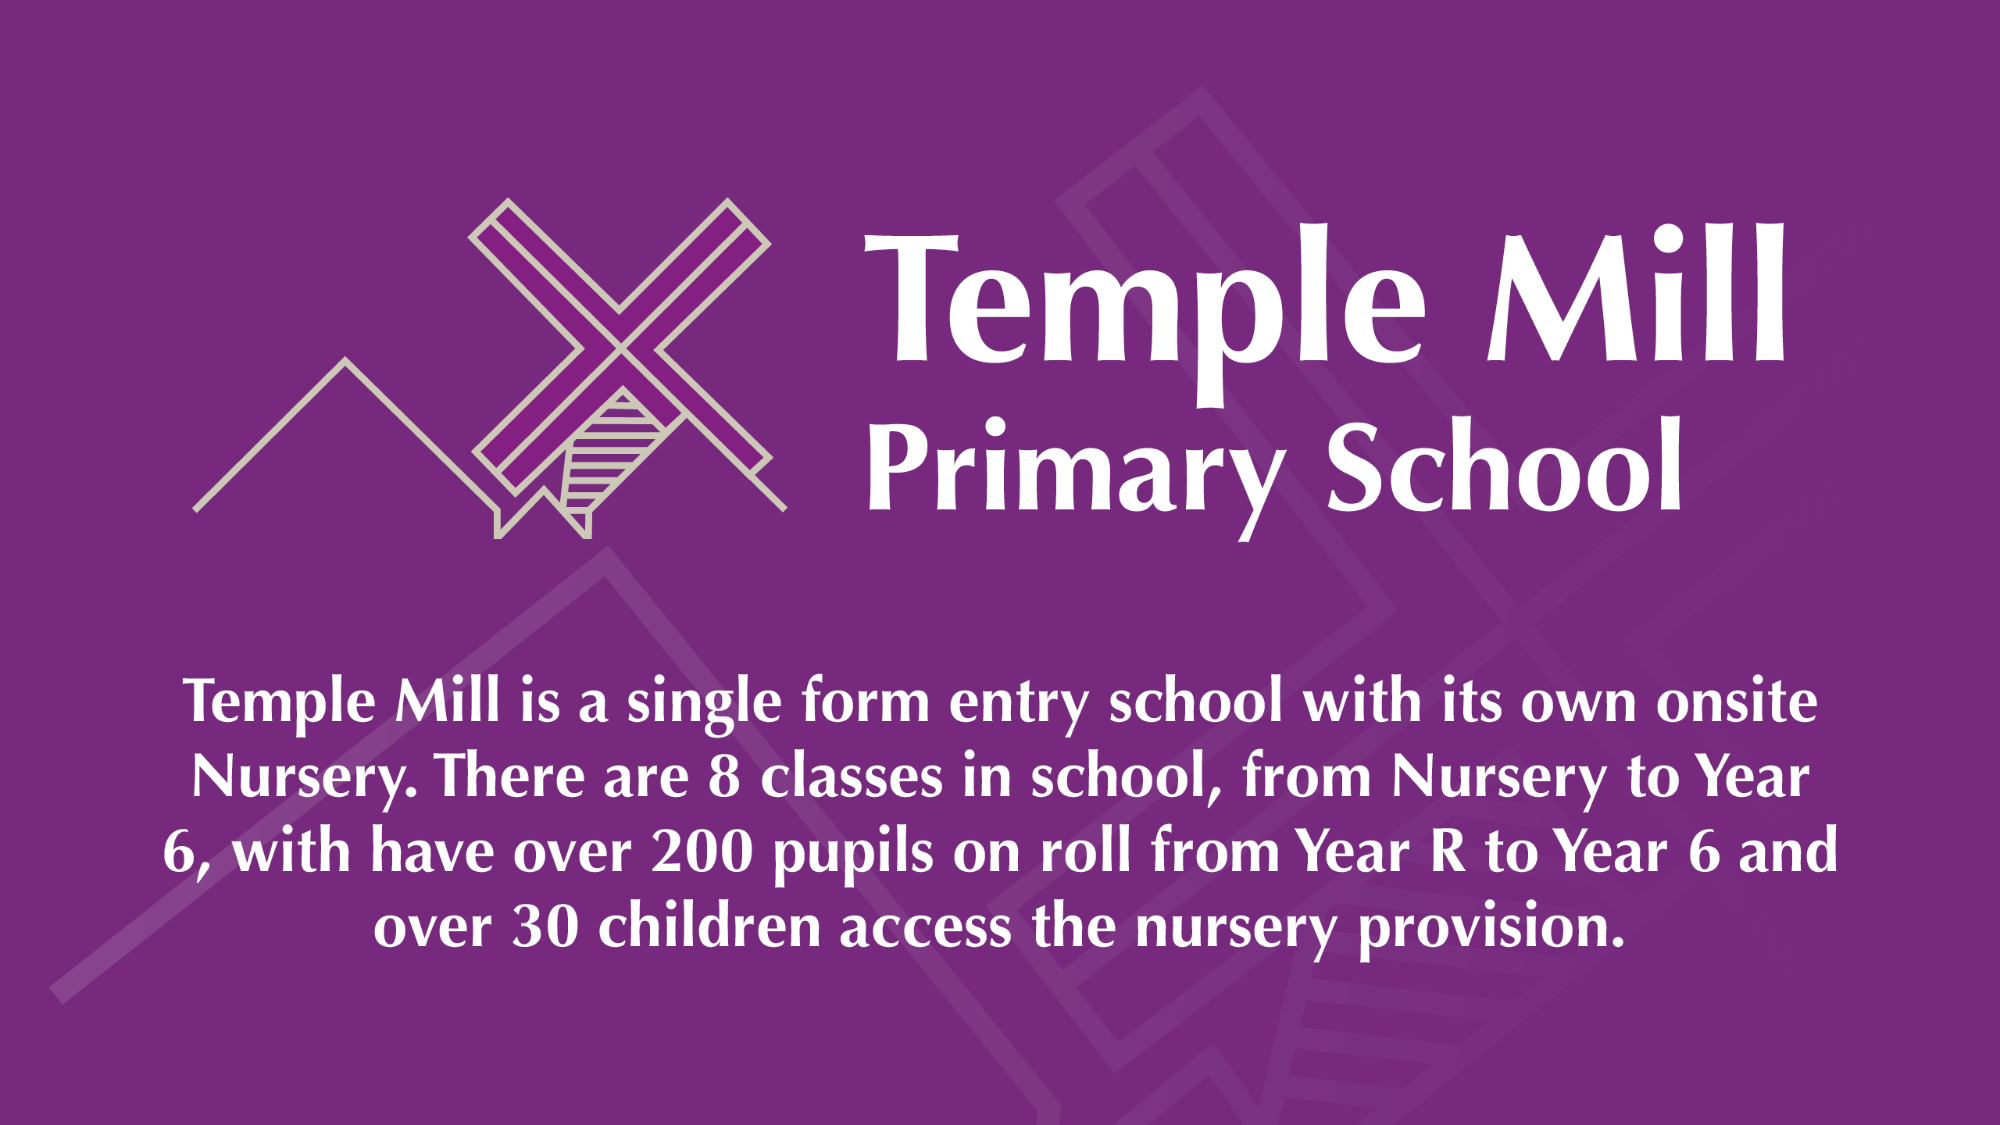 Temple Mill Primary School logo on a purple background.